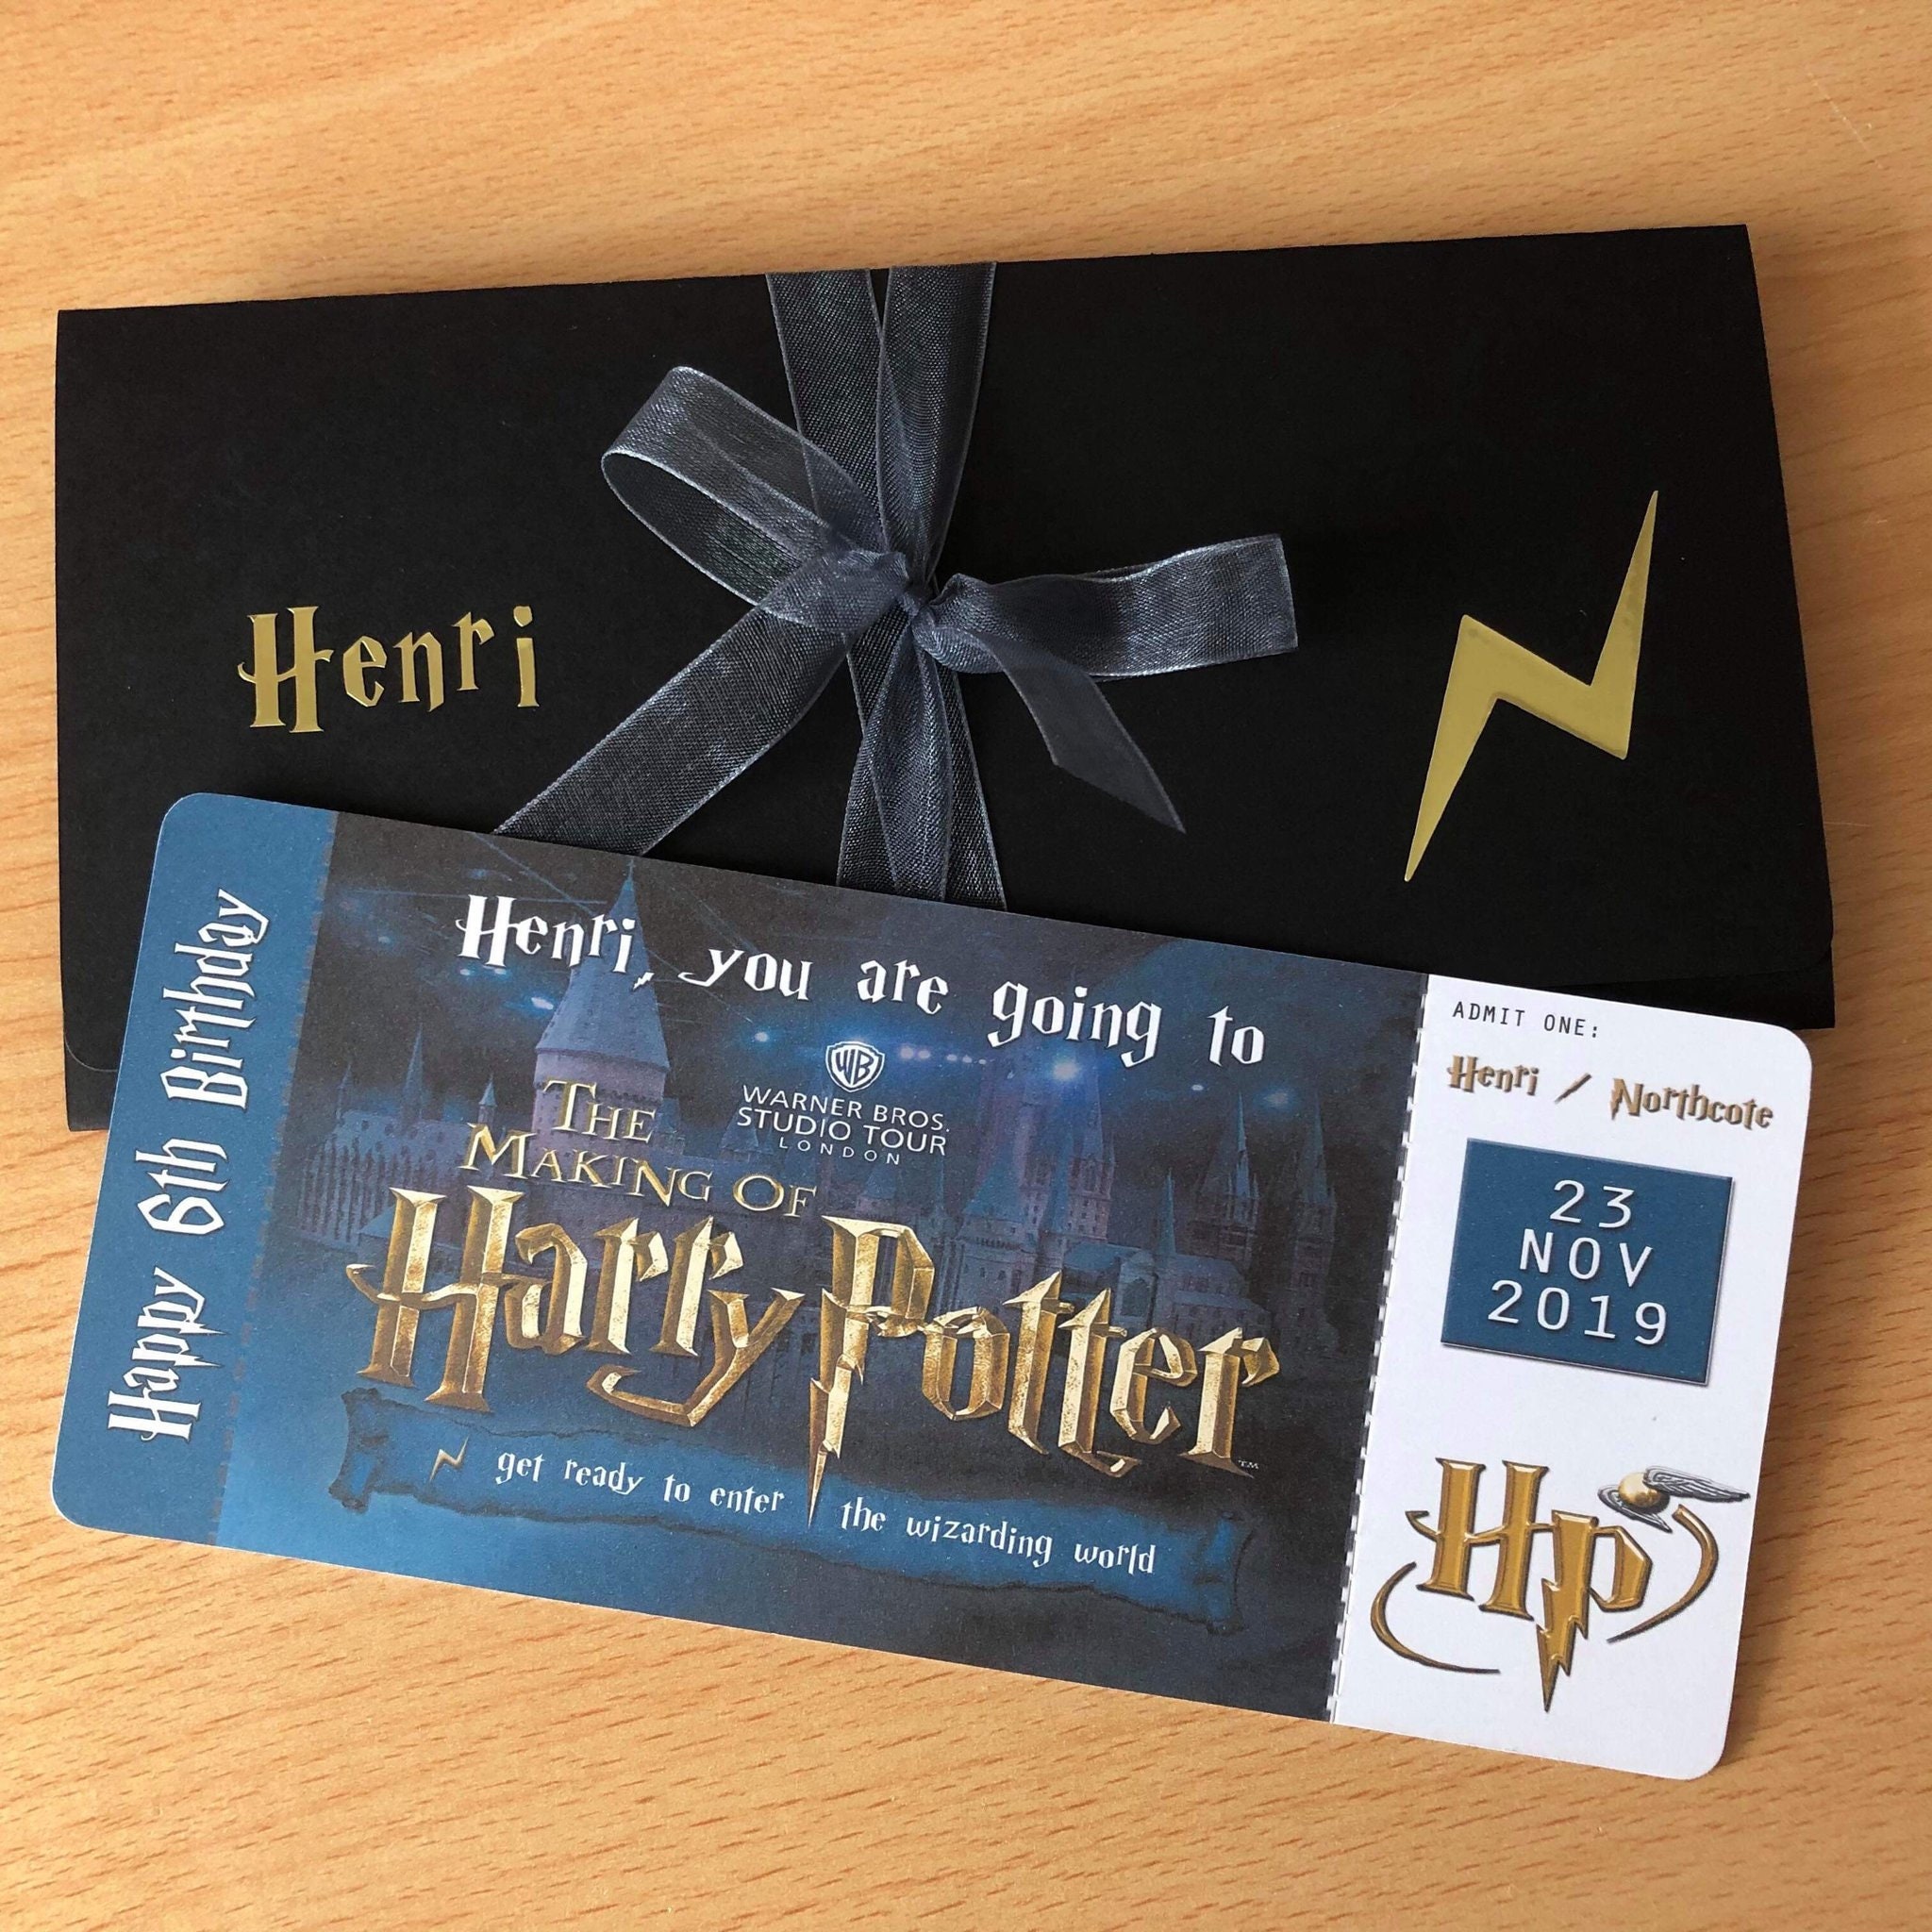 buy harry potter tour tickets